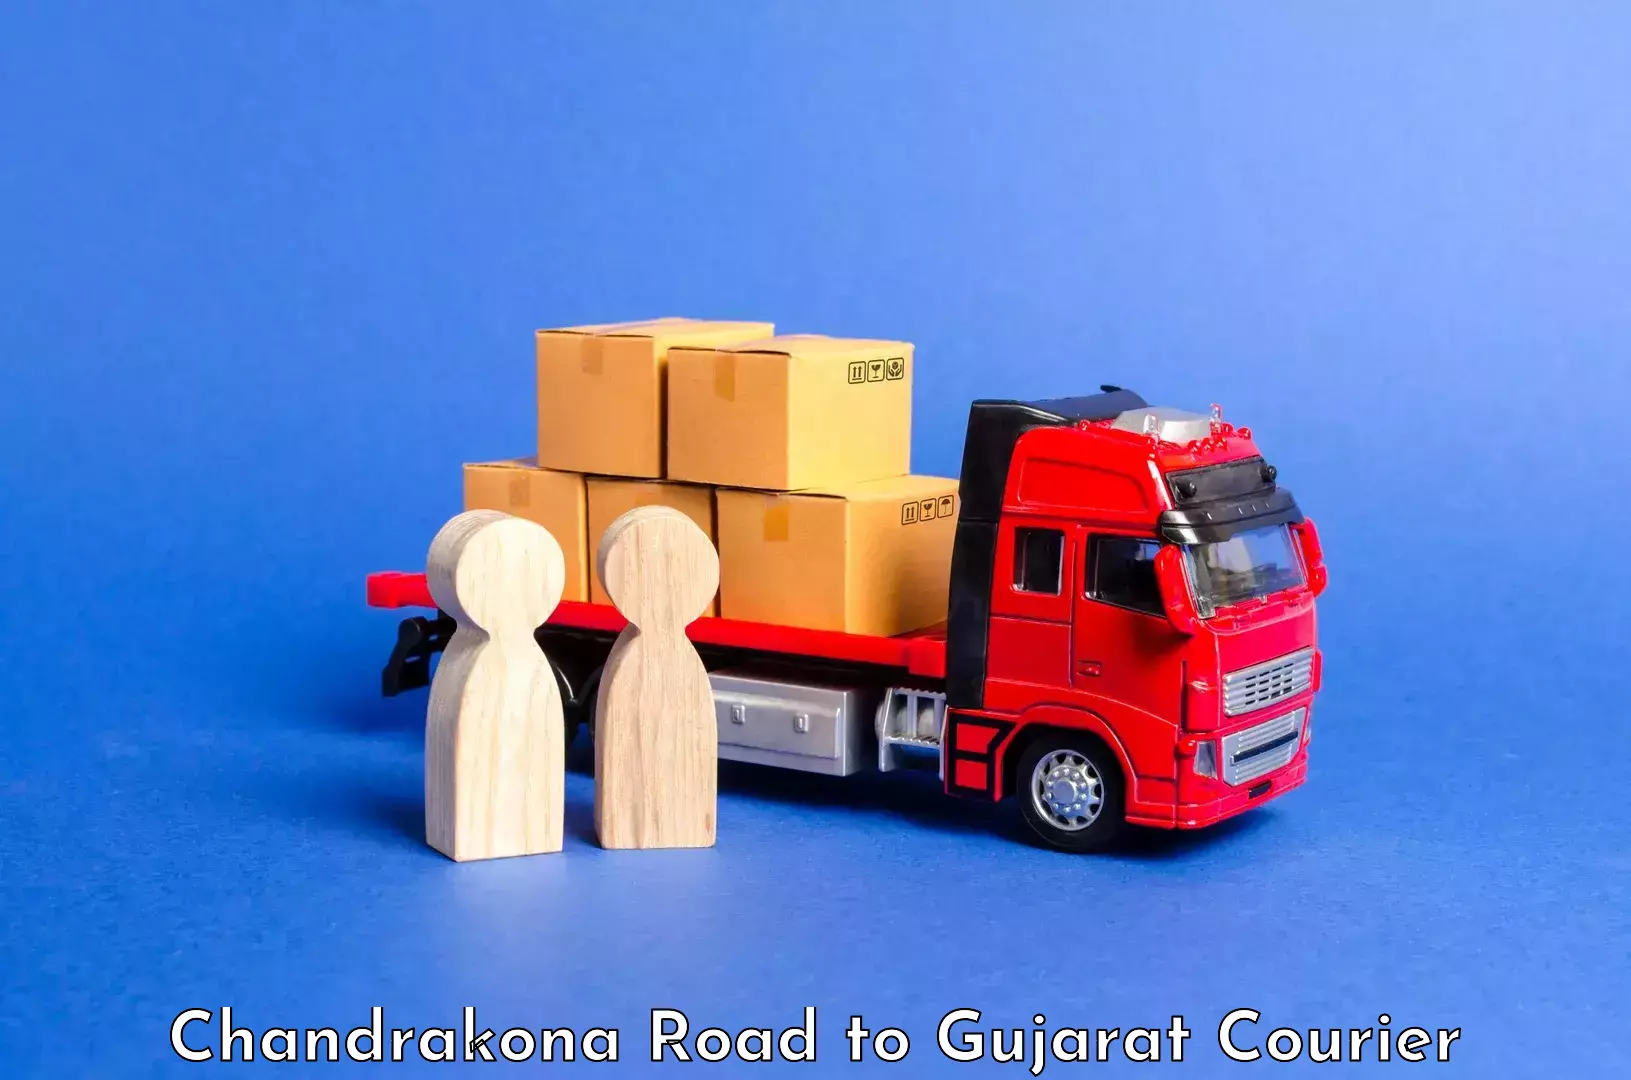 Luggage transport service Chandrakona Road to Bharuch